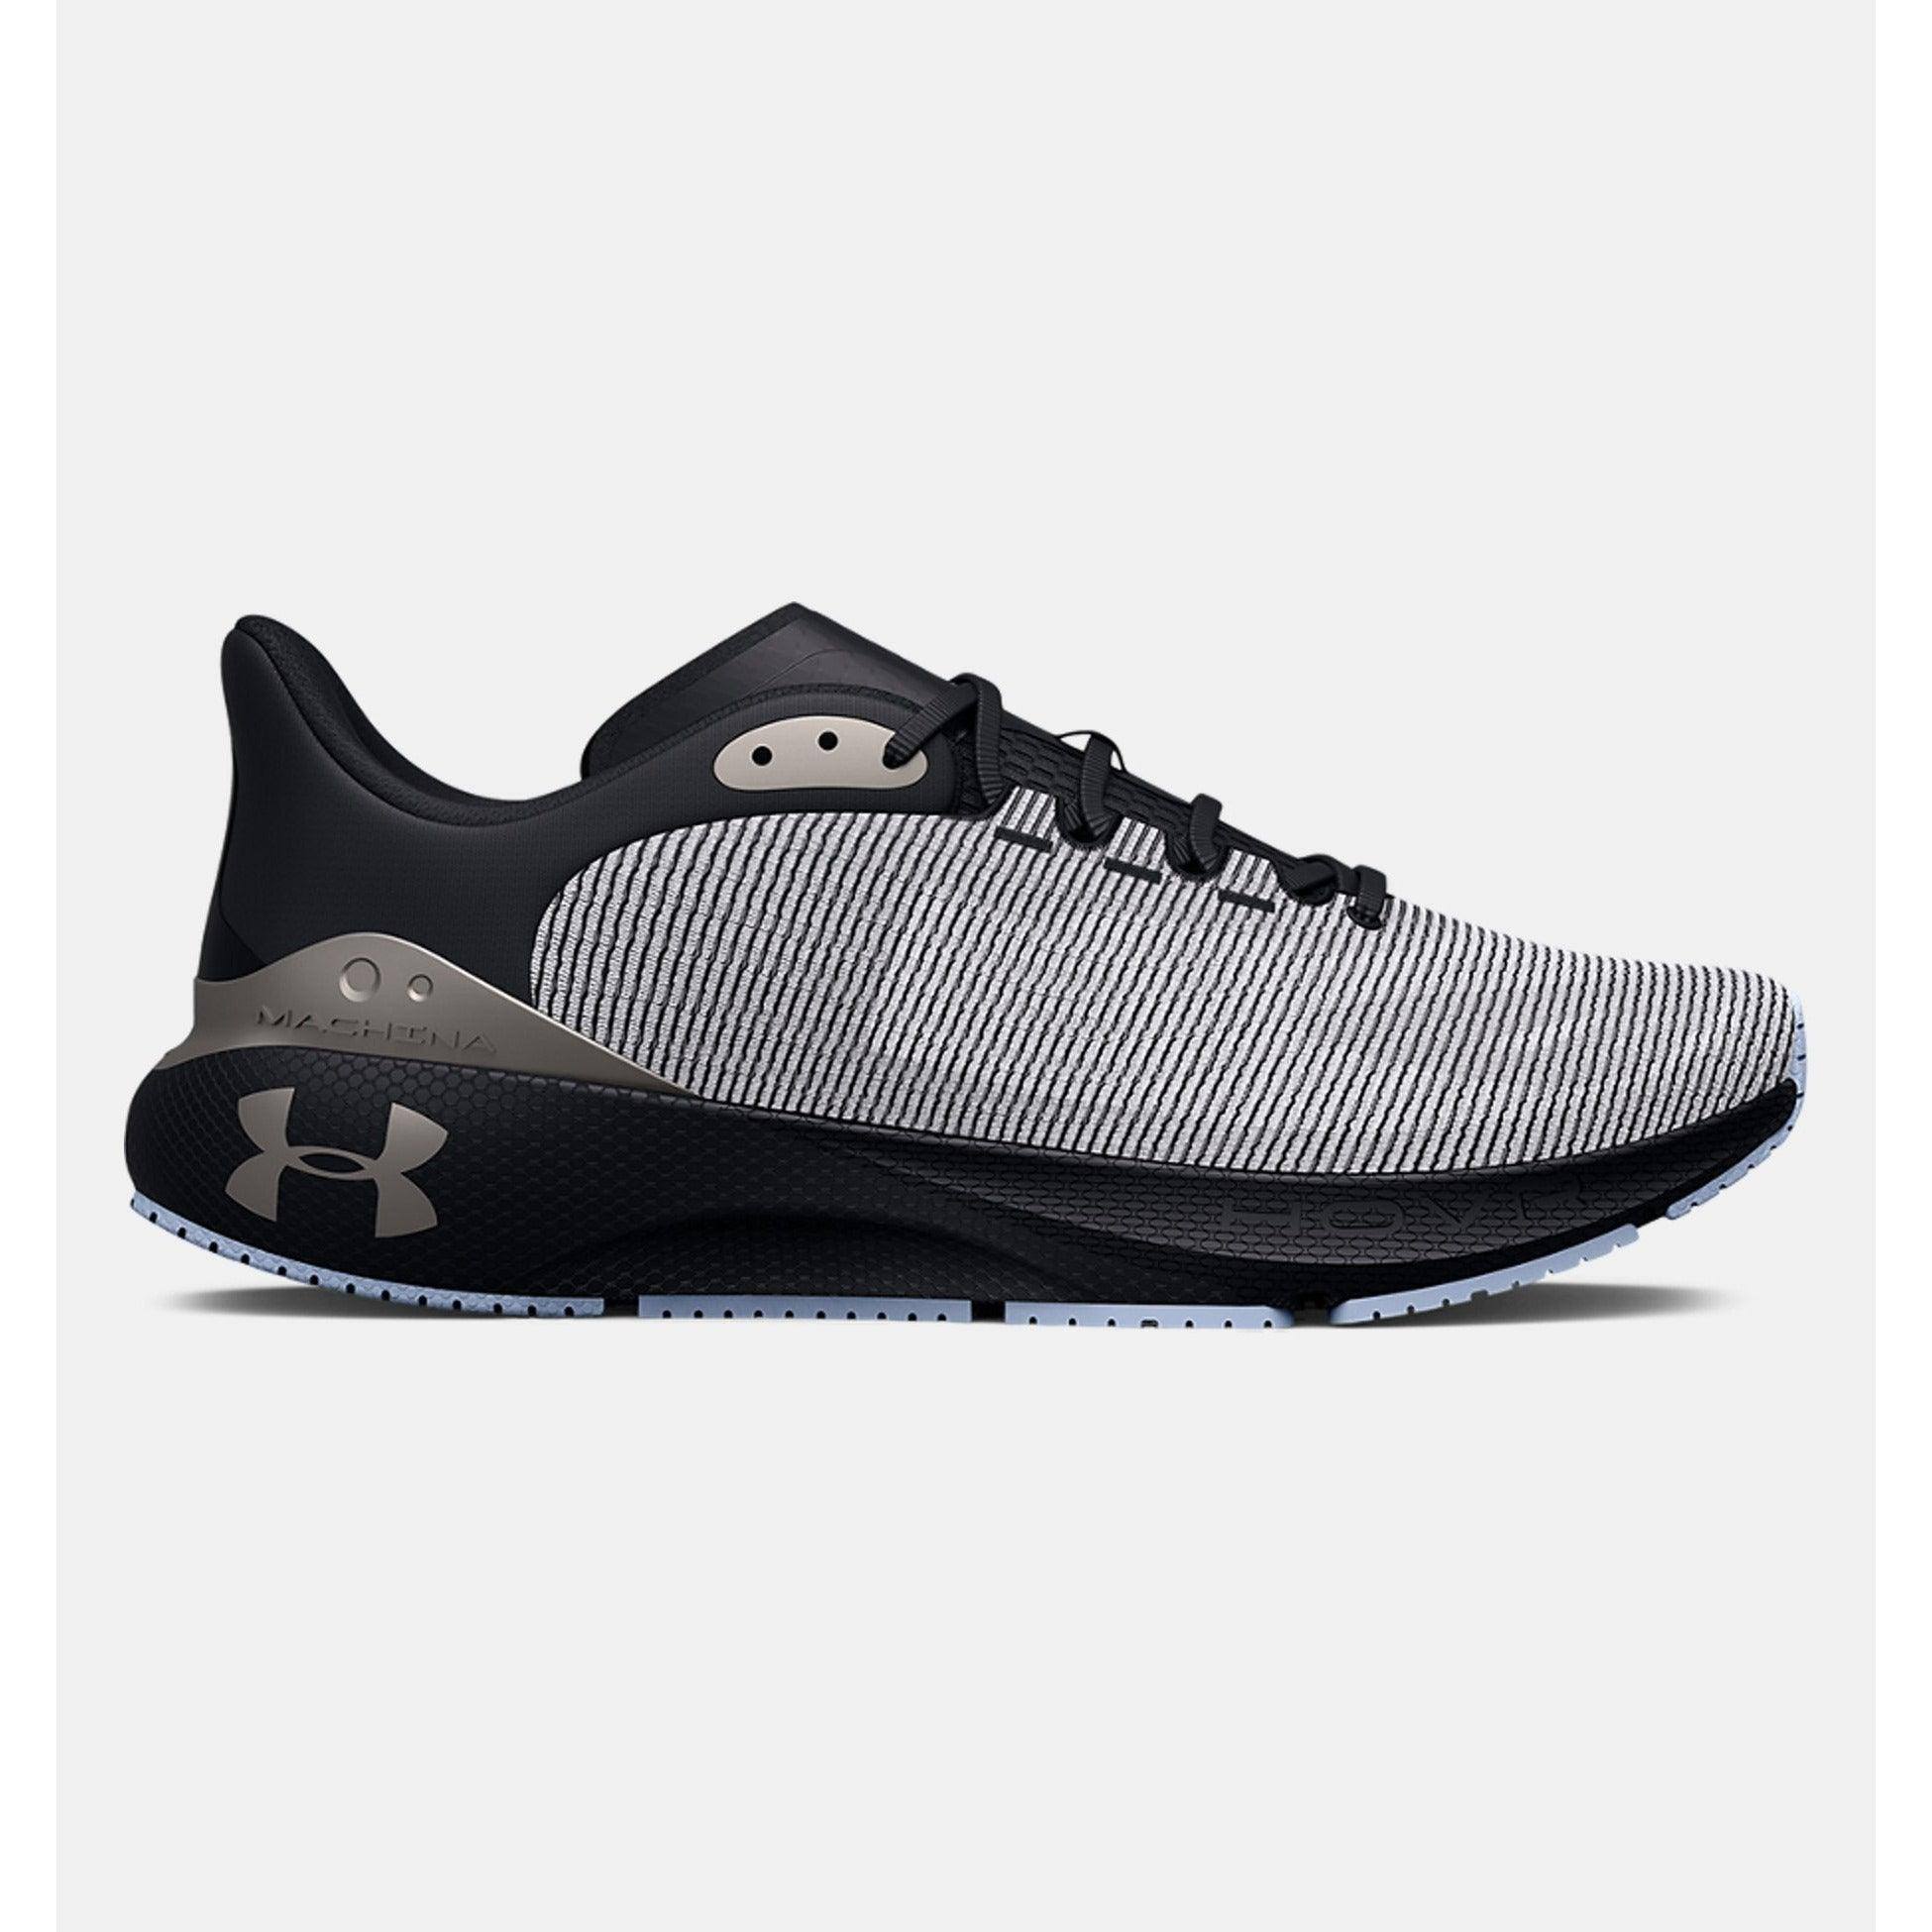 HOVR Machina 3 Breeze Bluetooth Running Shoe - The Shoe CollectiveUnder Armour